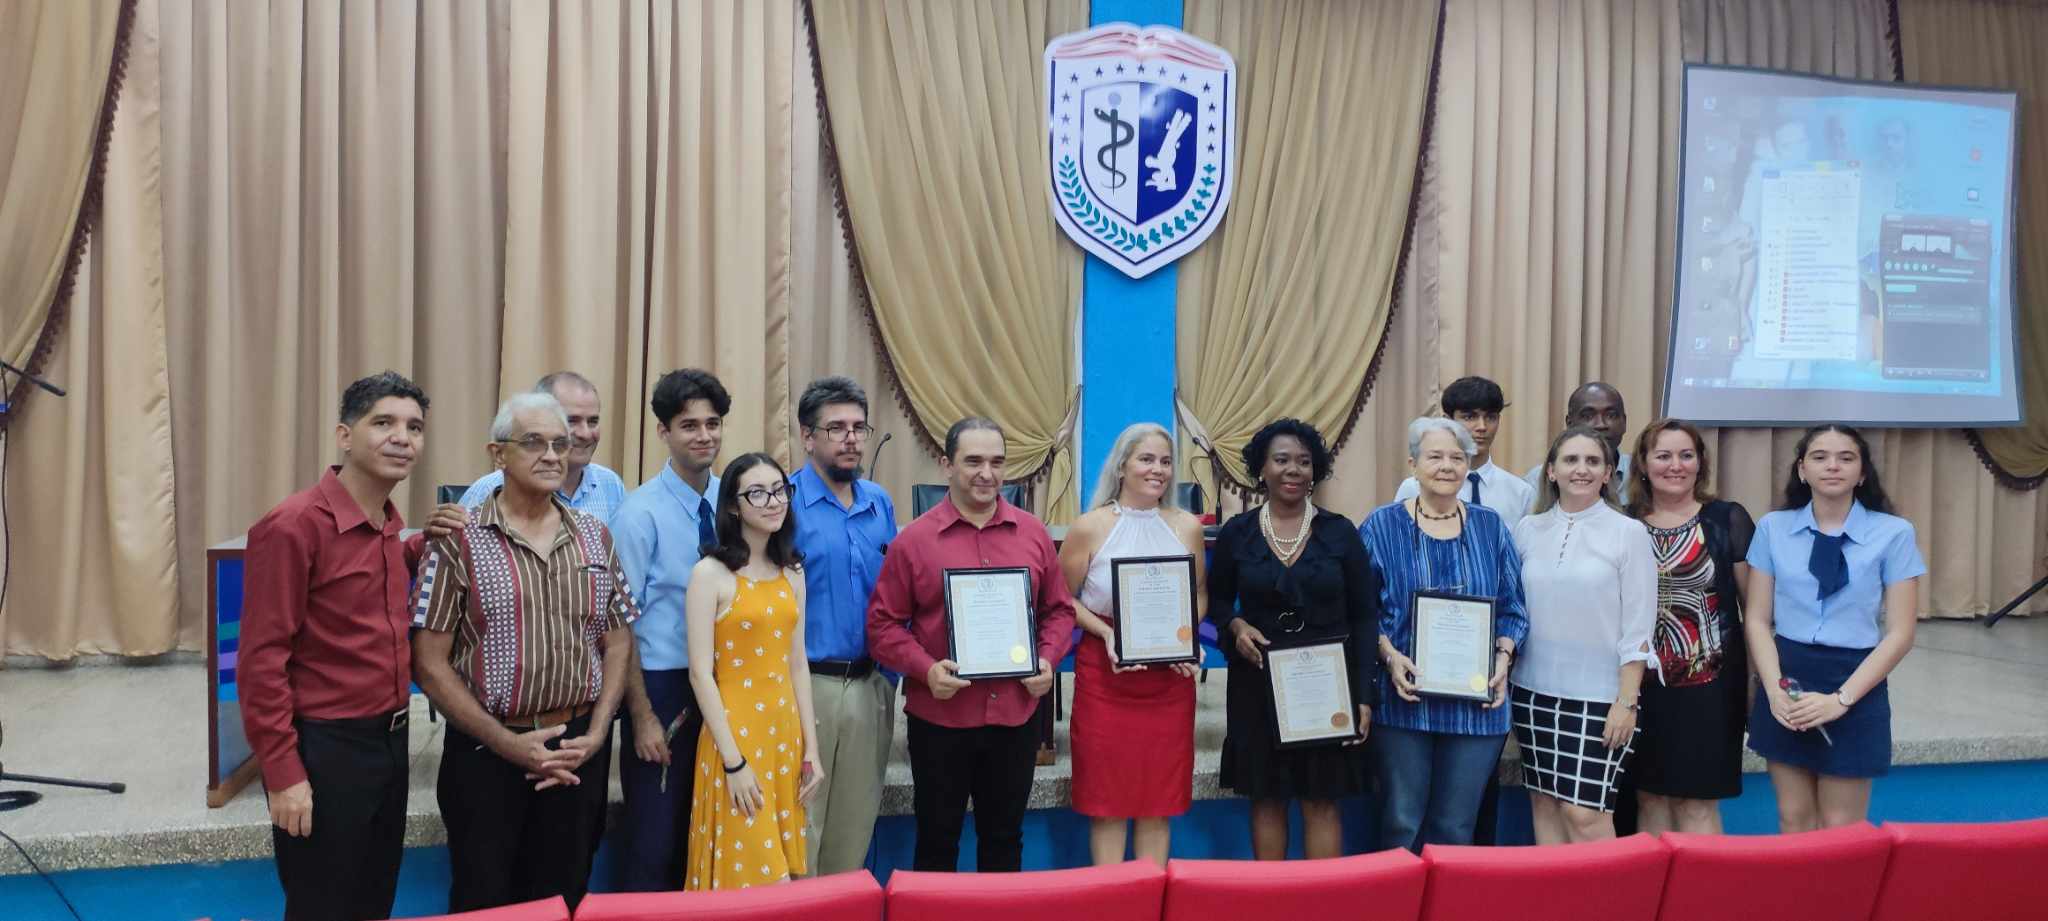 Camagüey researchers receive National Award from the Cuban Academy of Sciences